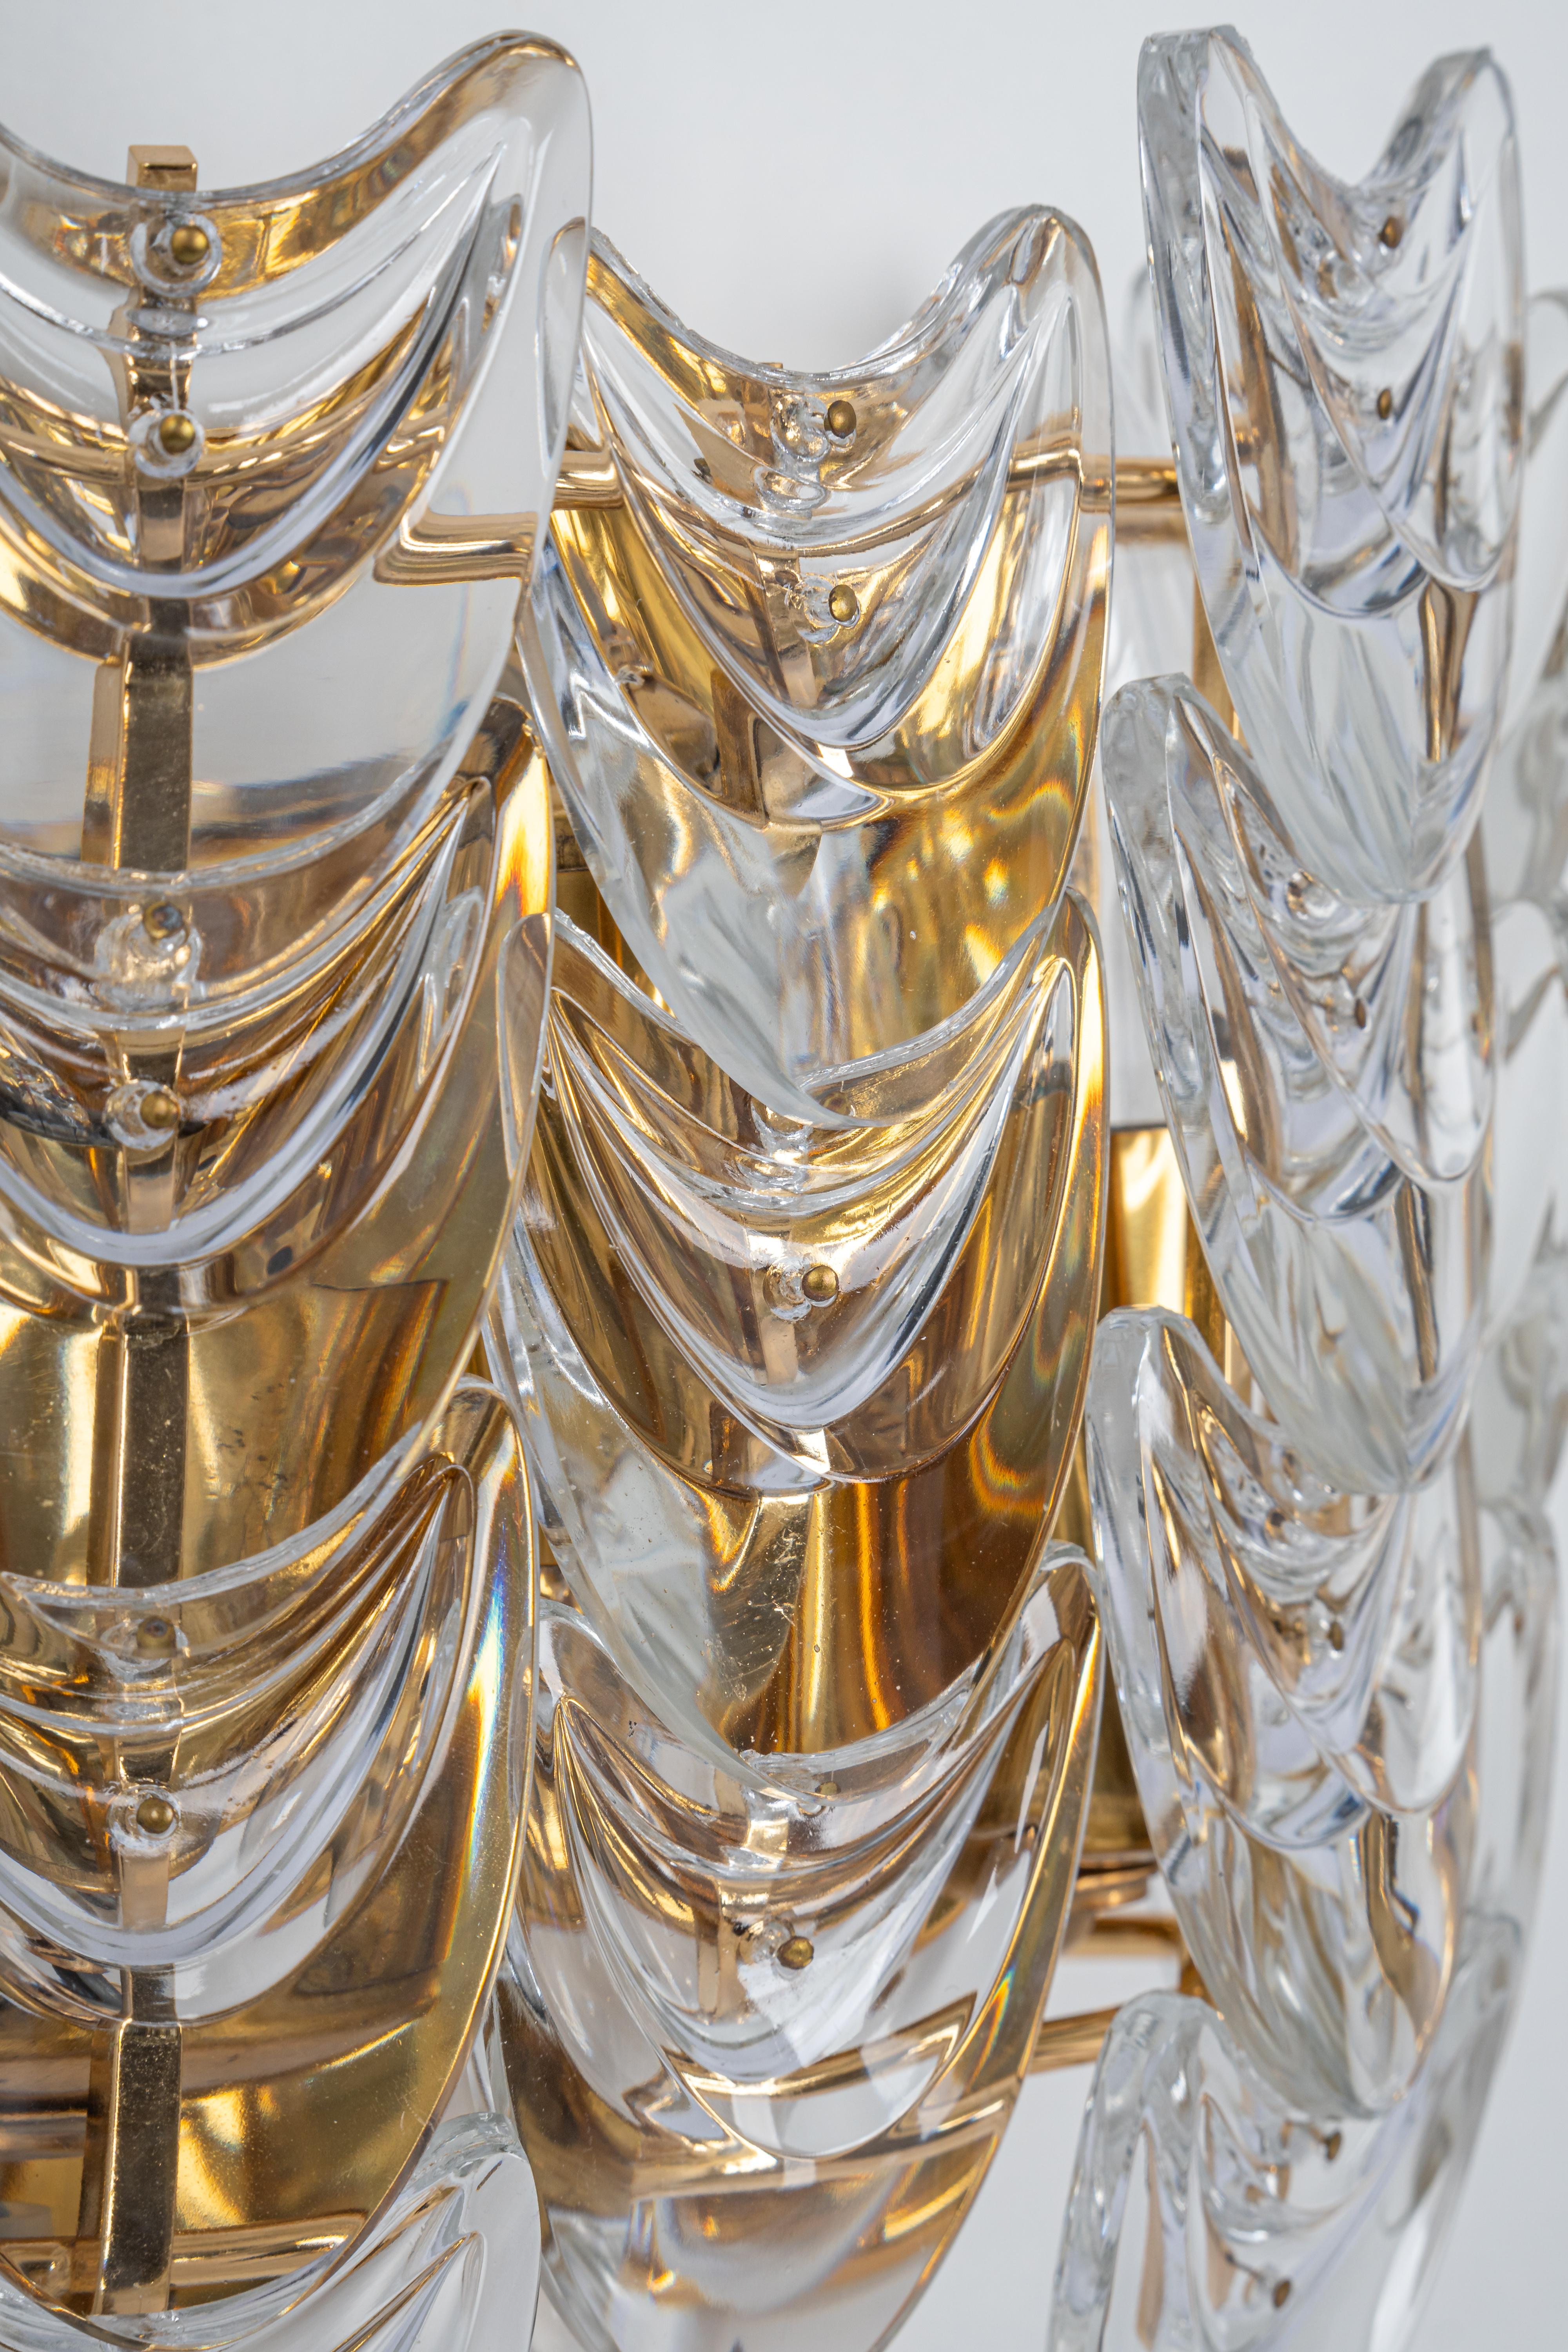 Pair of Gilded Brass Crystal Wall Lights, Sciolari Design, Palwa, Germany, 1960s For Sale 1